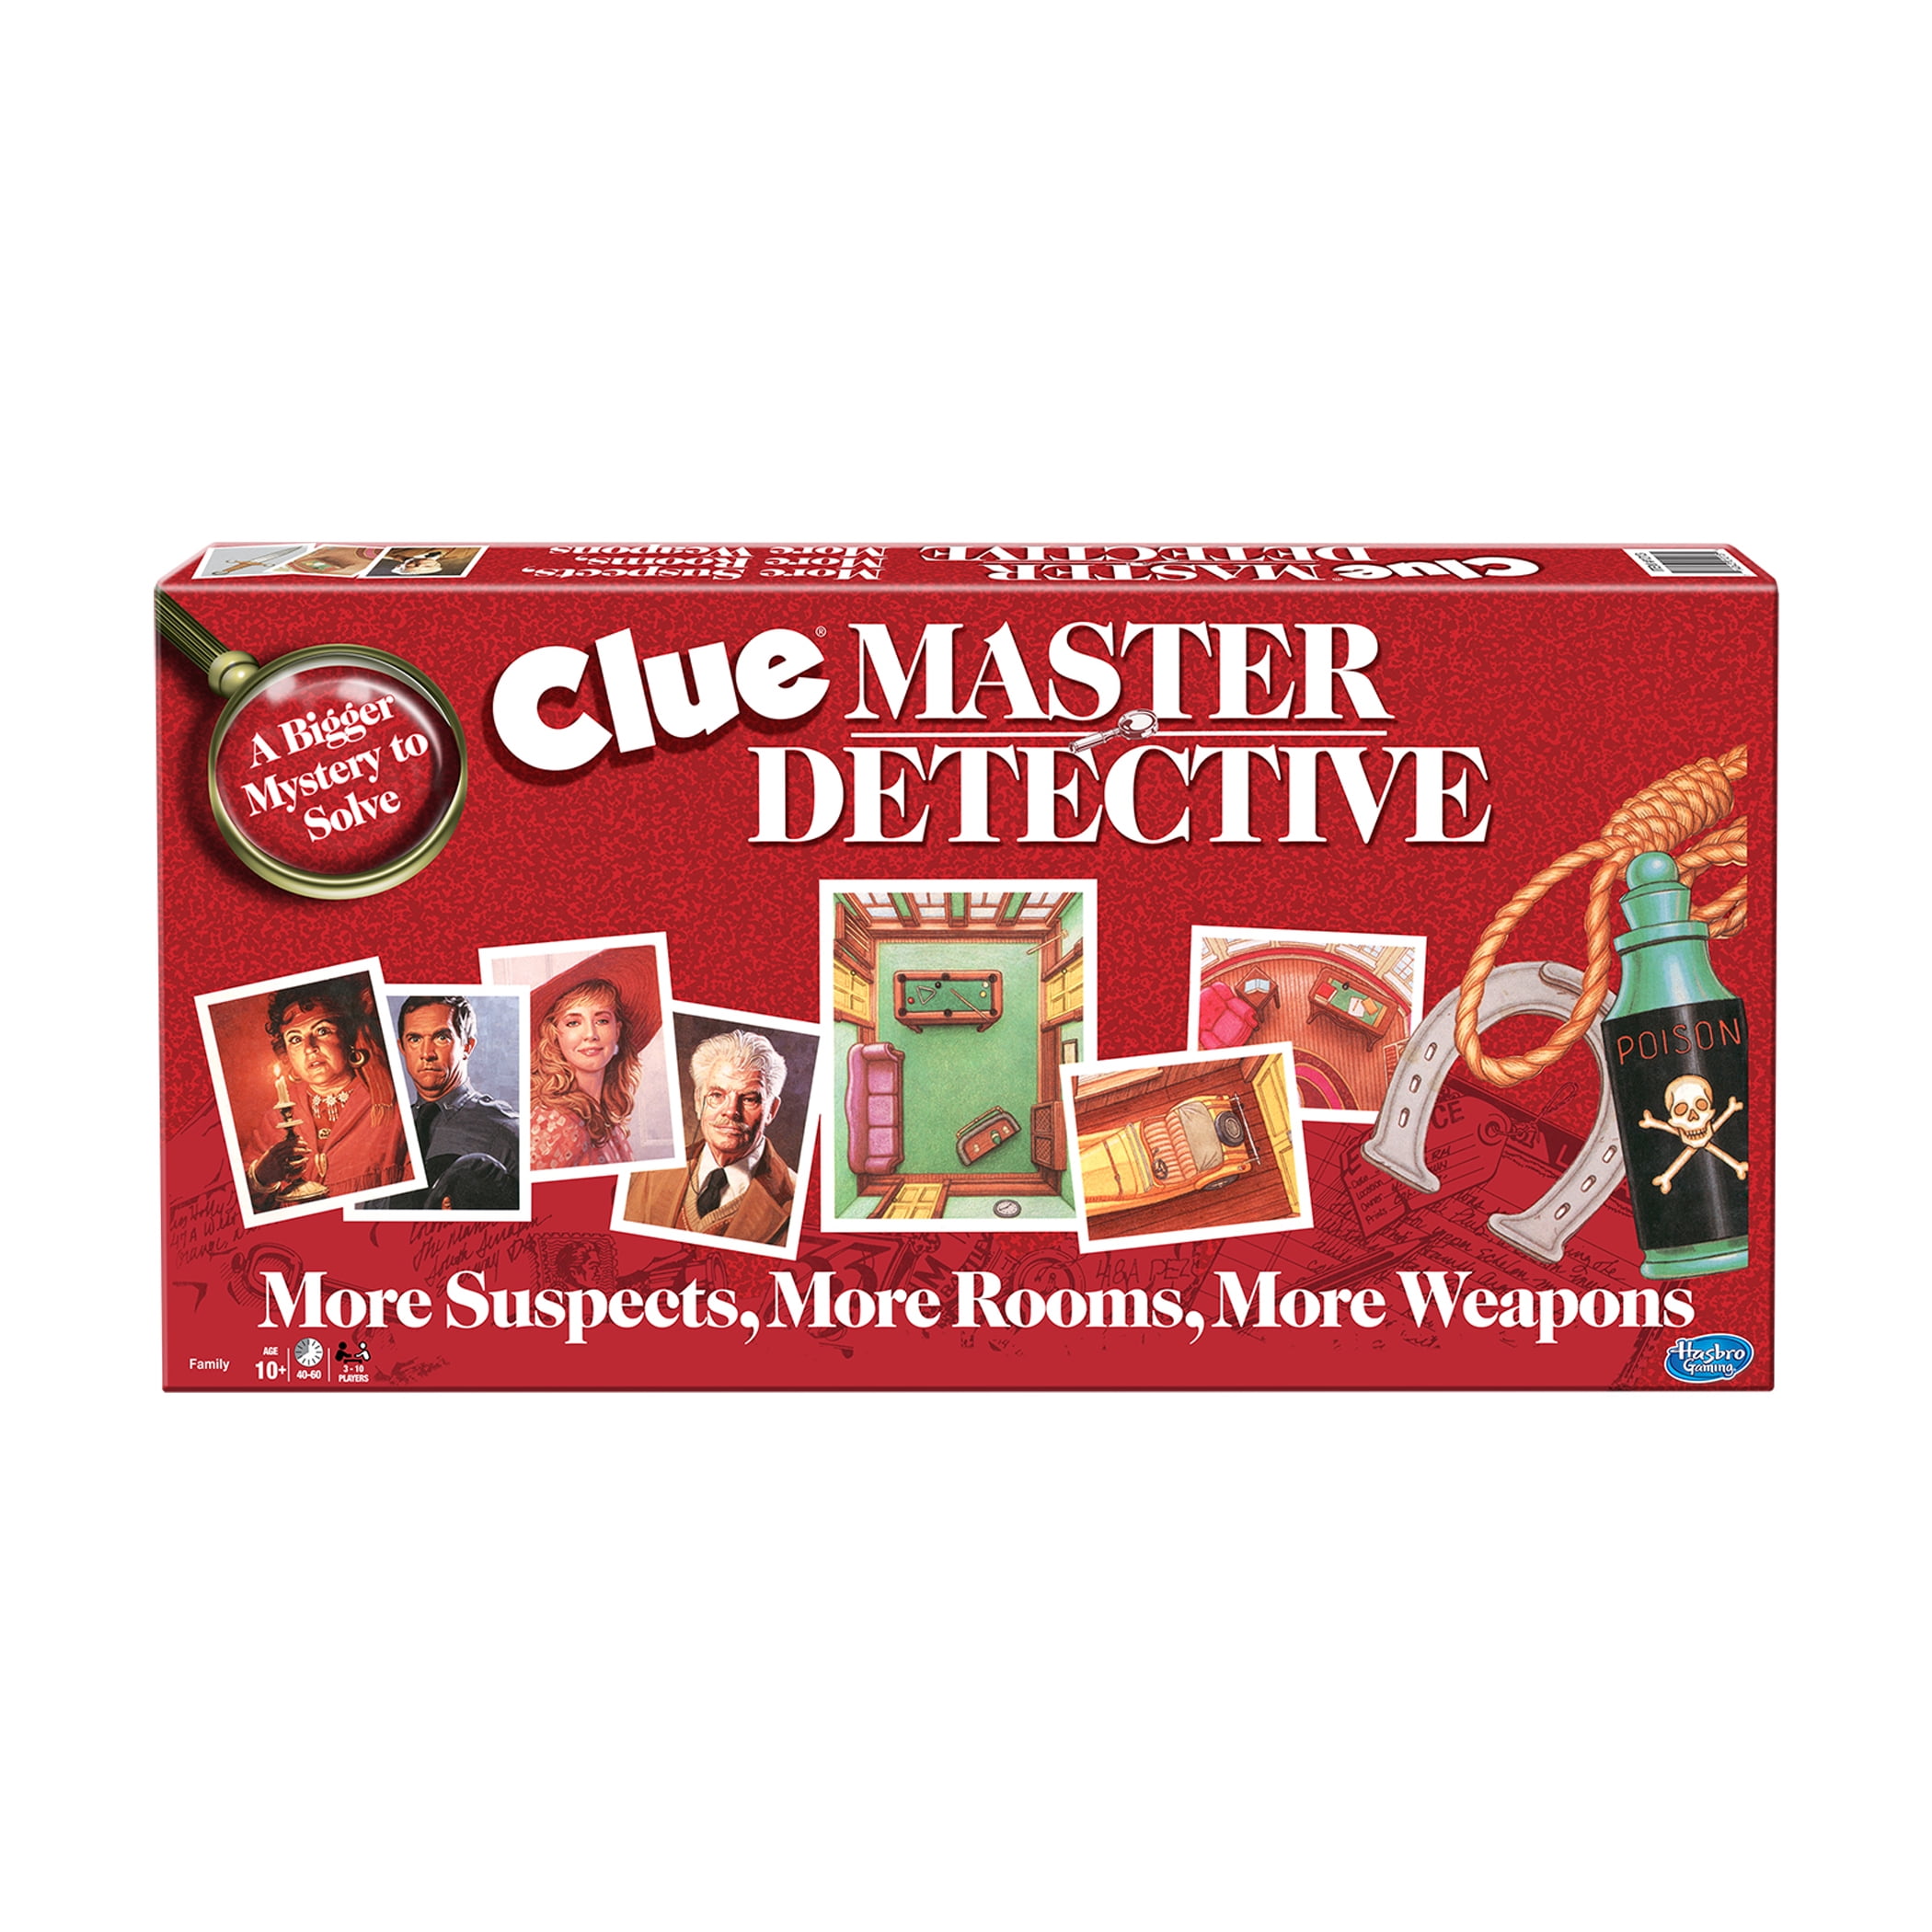 New Cluedo Junior Classic Detective Board Game Family Fun Kids Educational Toy 